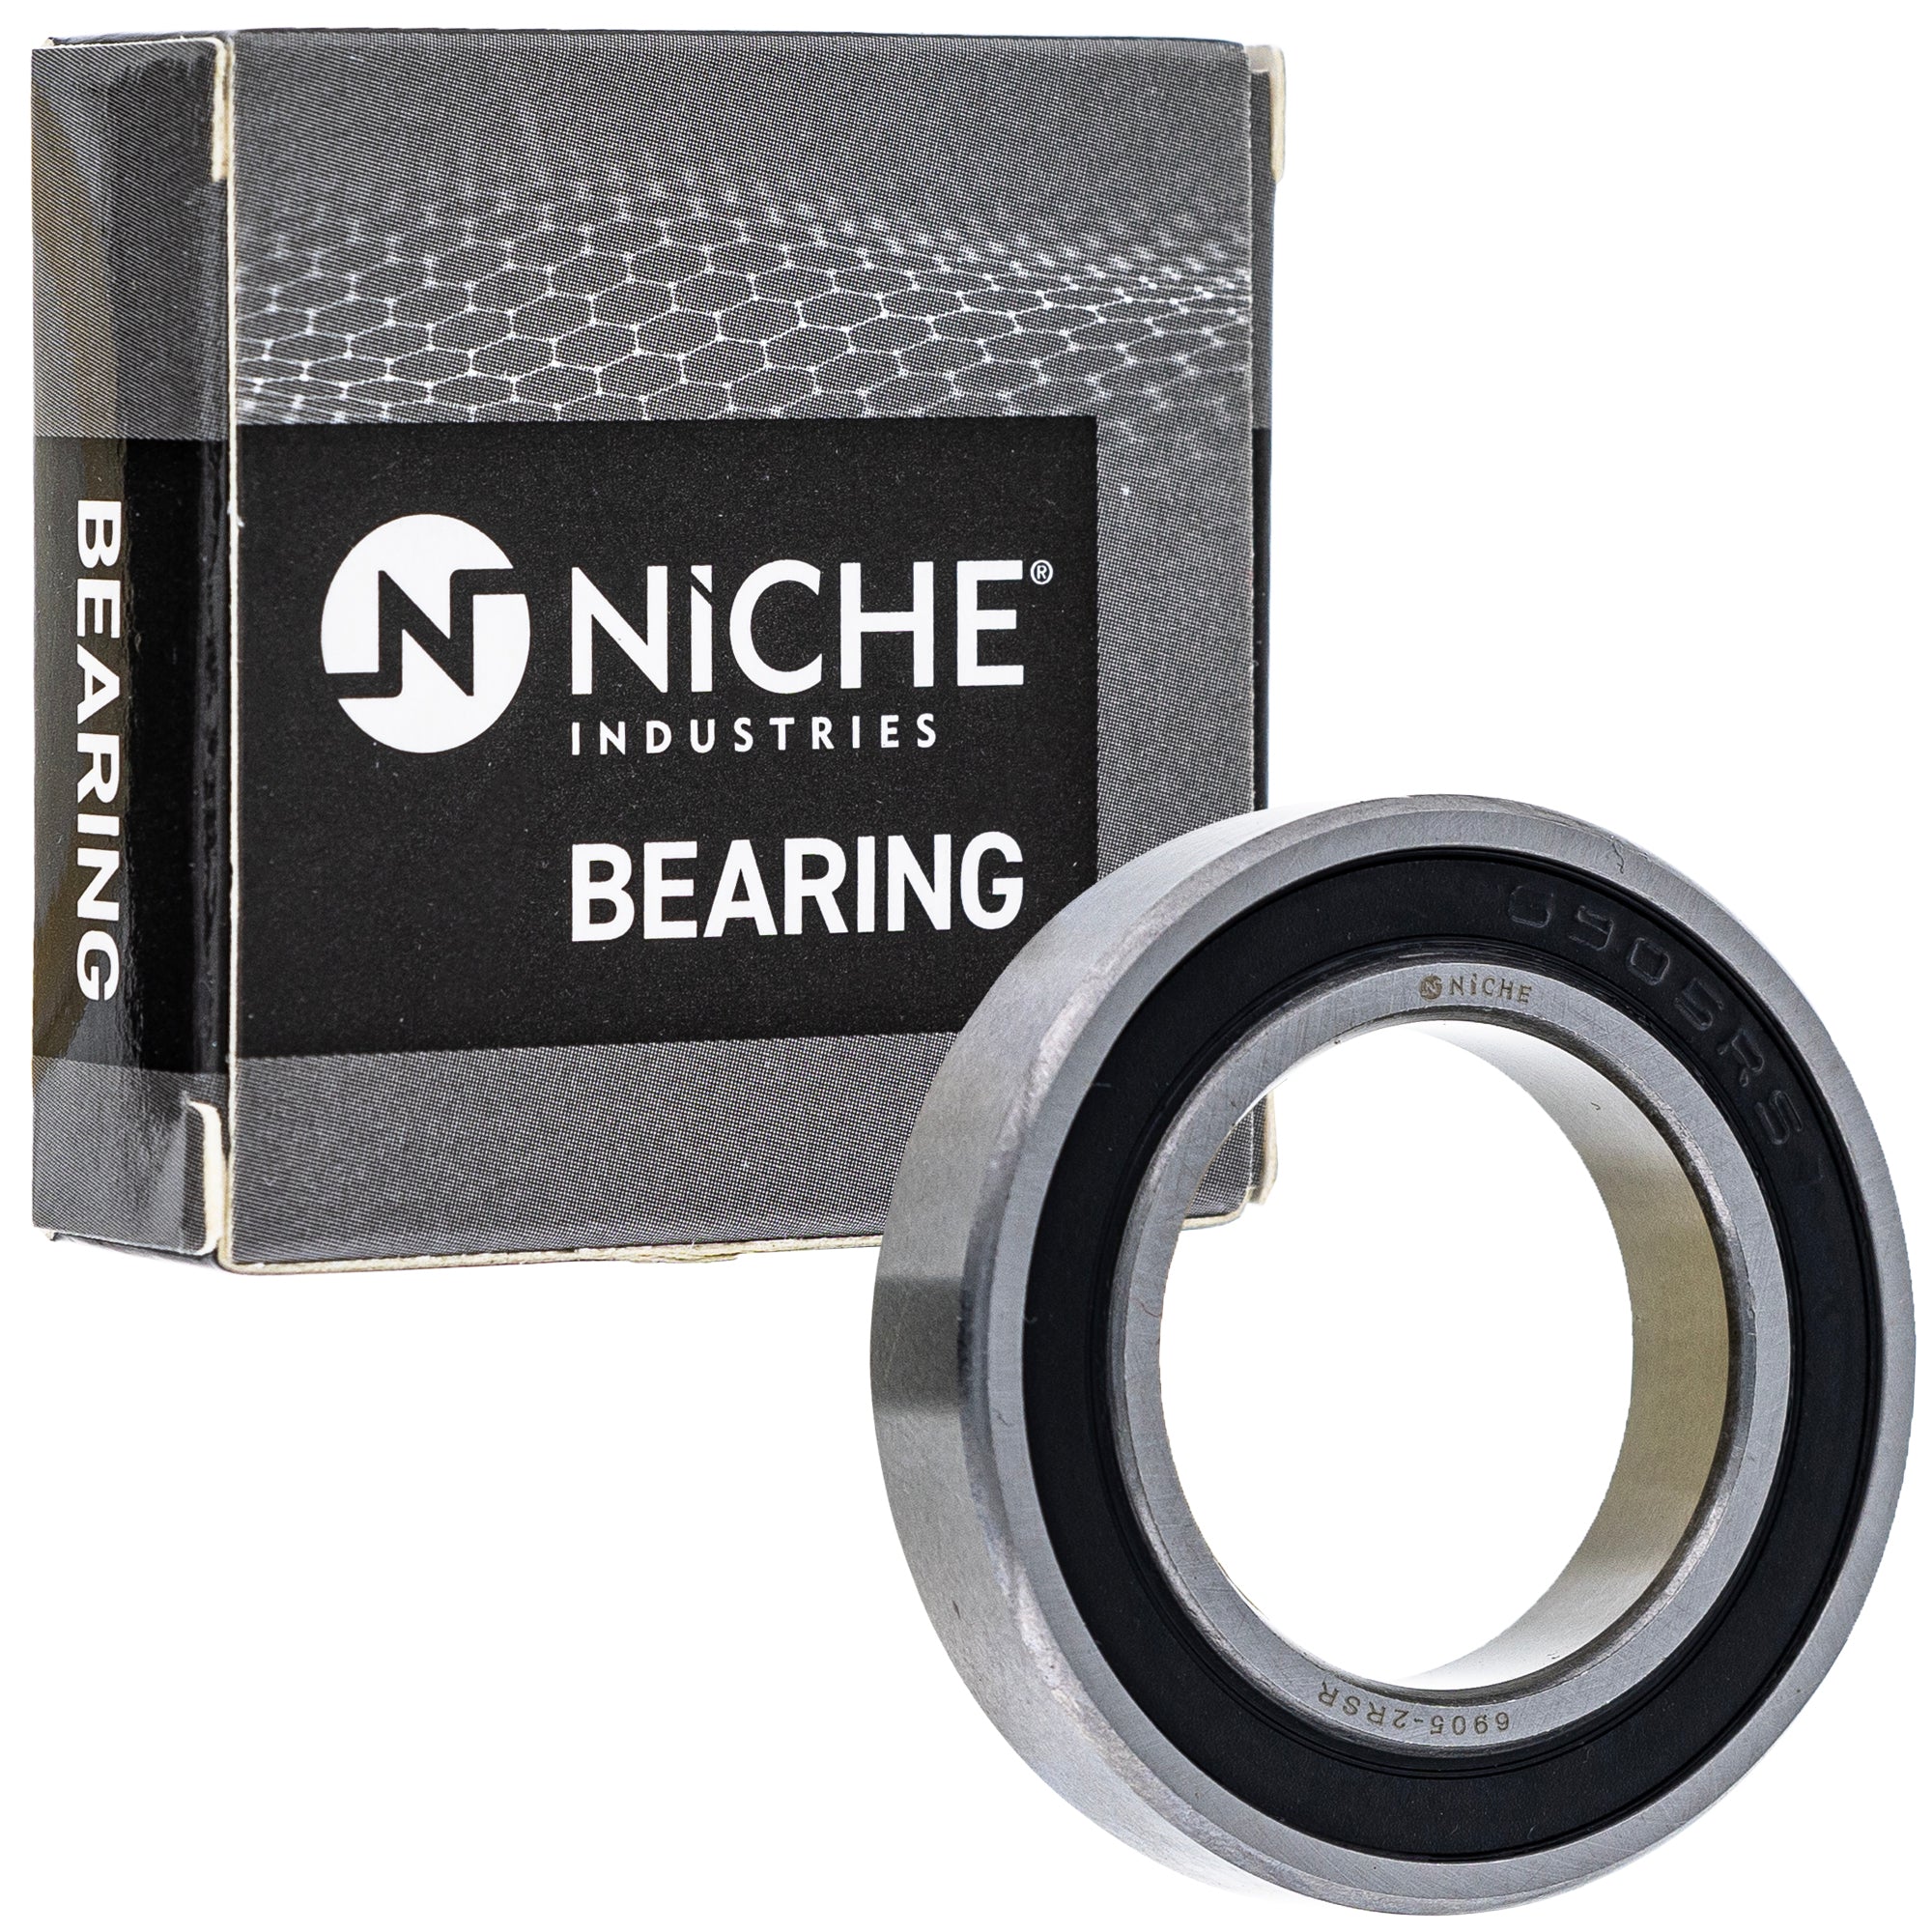 NICHE 519-CBB2338R Bearing & Seal Kit 2-Pack for zOTHER VTX1800T3